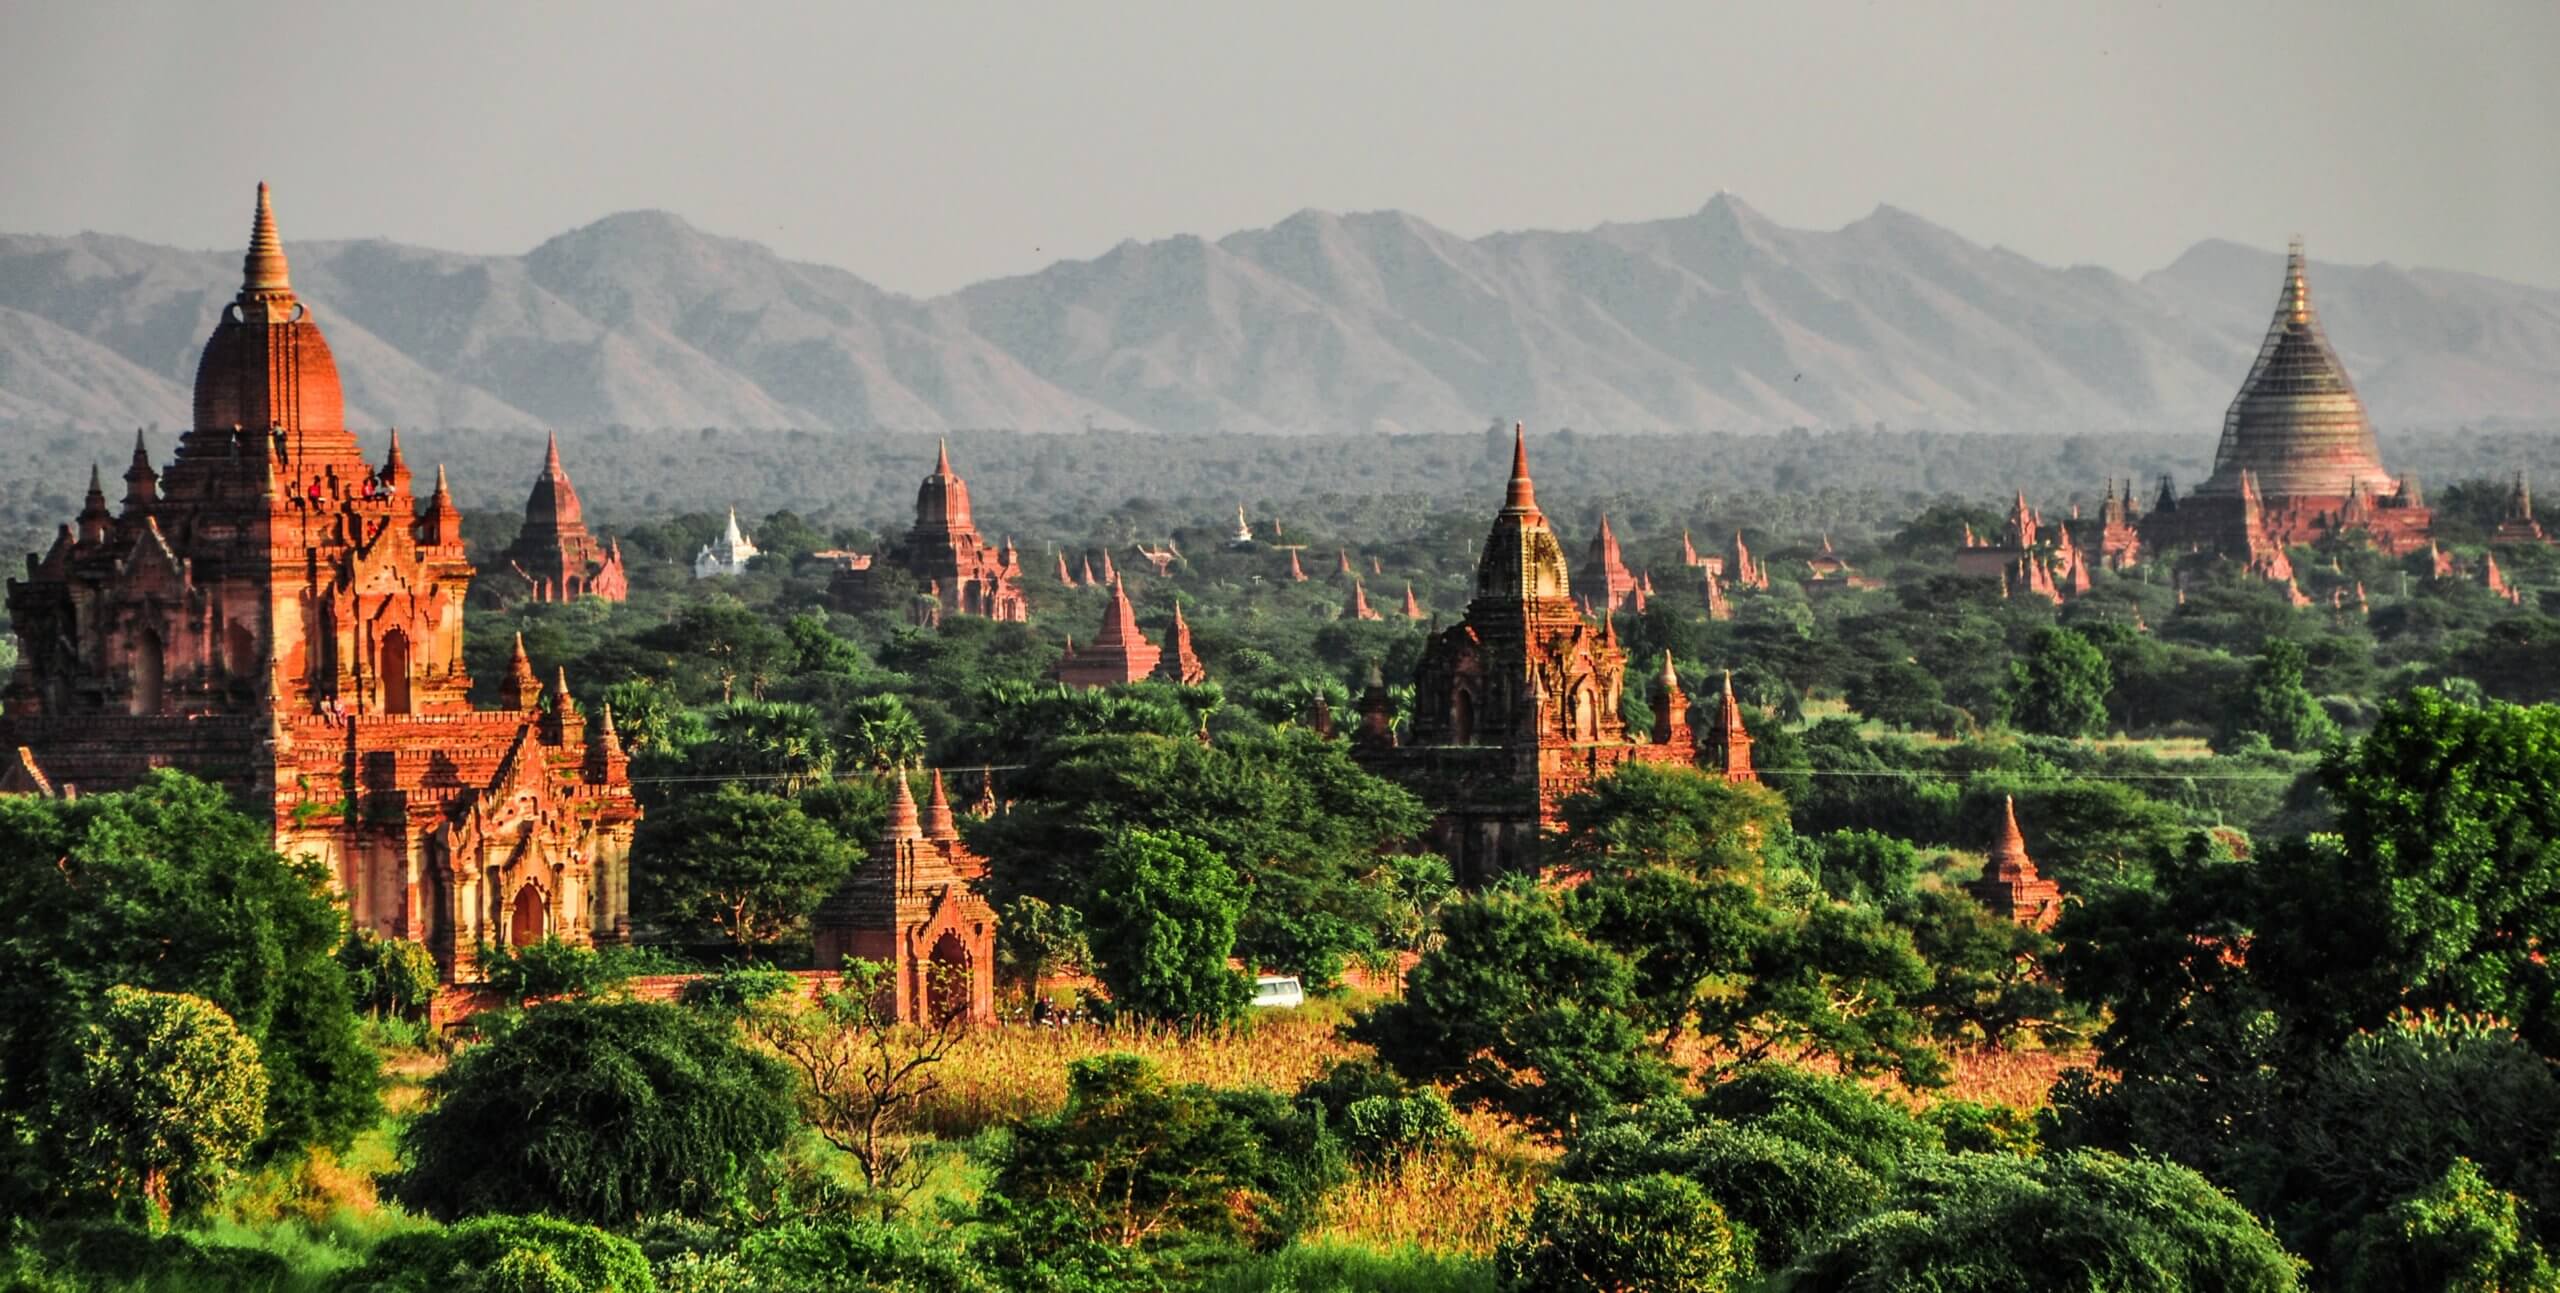 Bagan Itinerary: Best of Bagan Temples in 1, 2 and 3 days